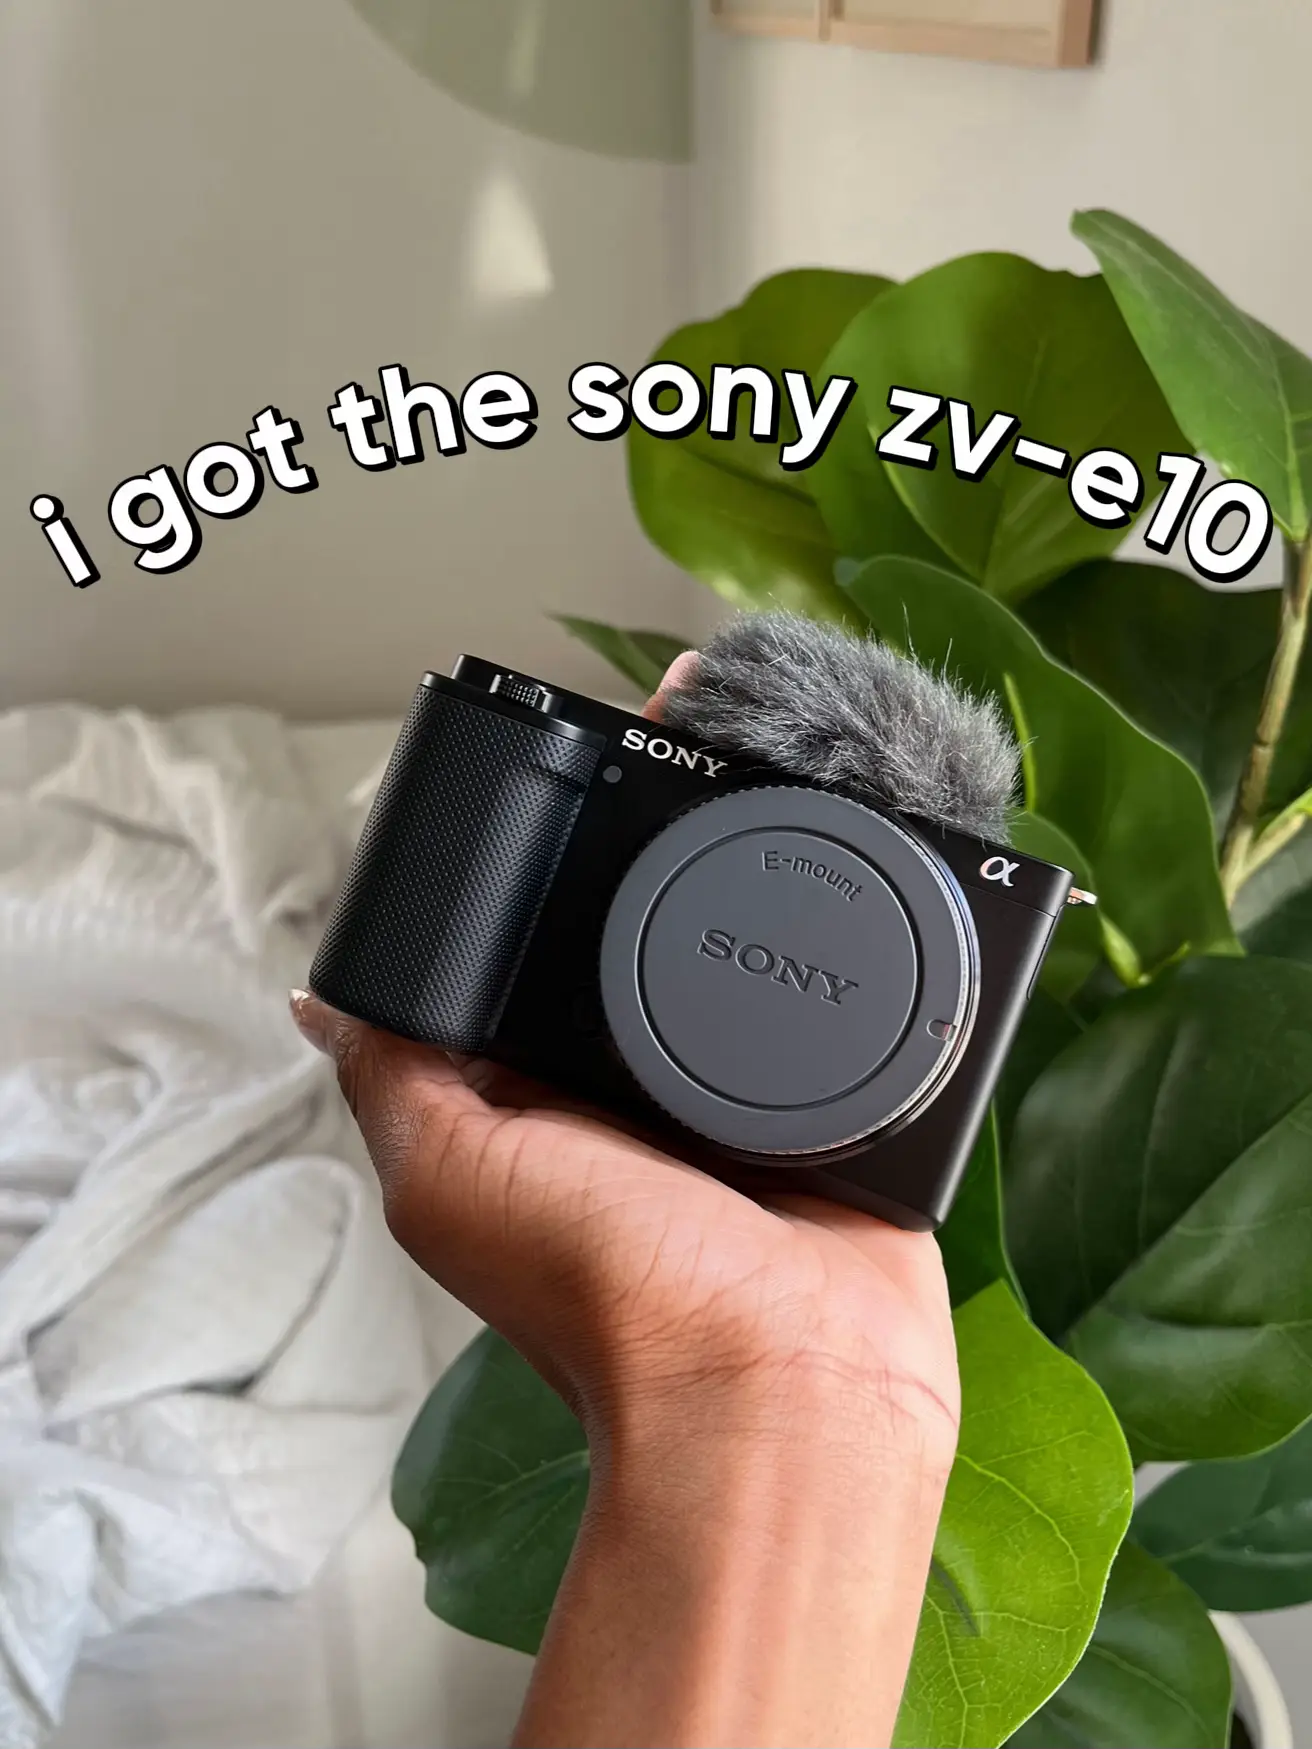 We Look at the Sony ZV-E10 From an Honest Perspective